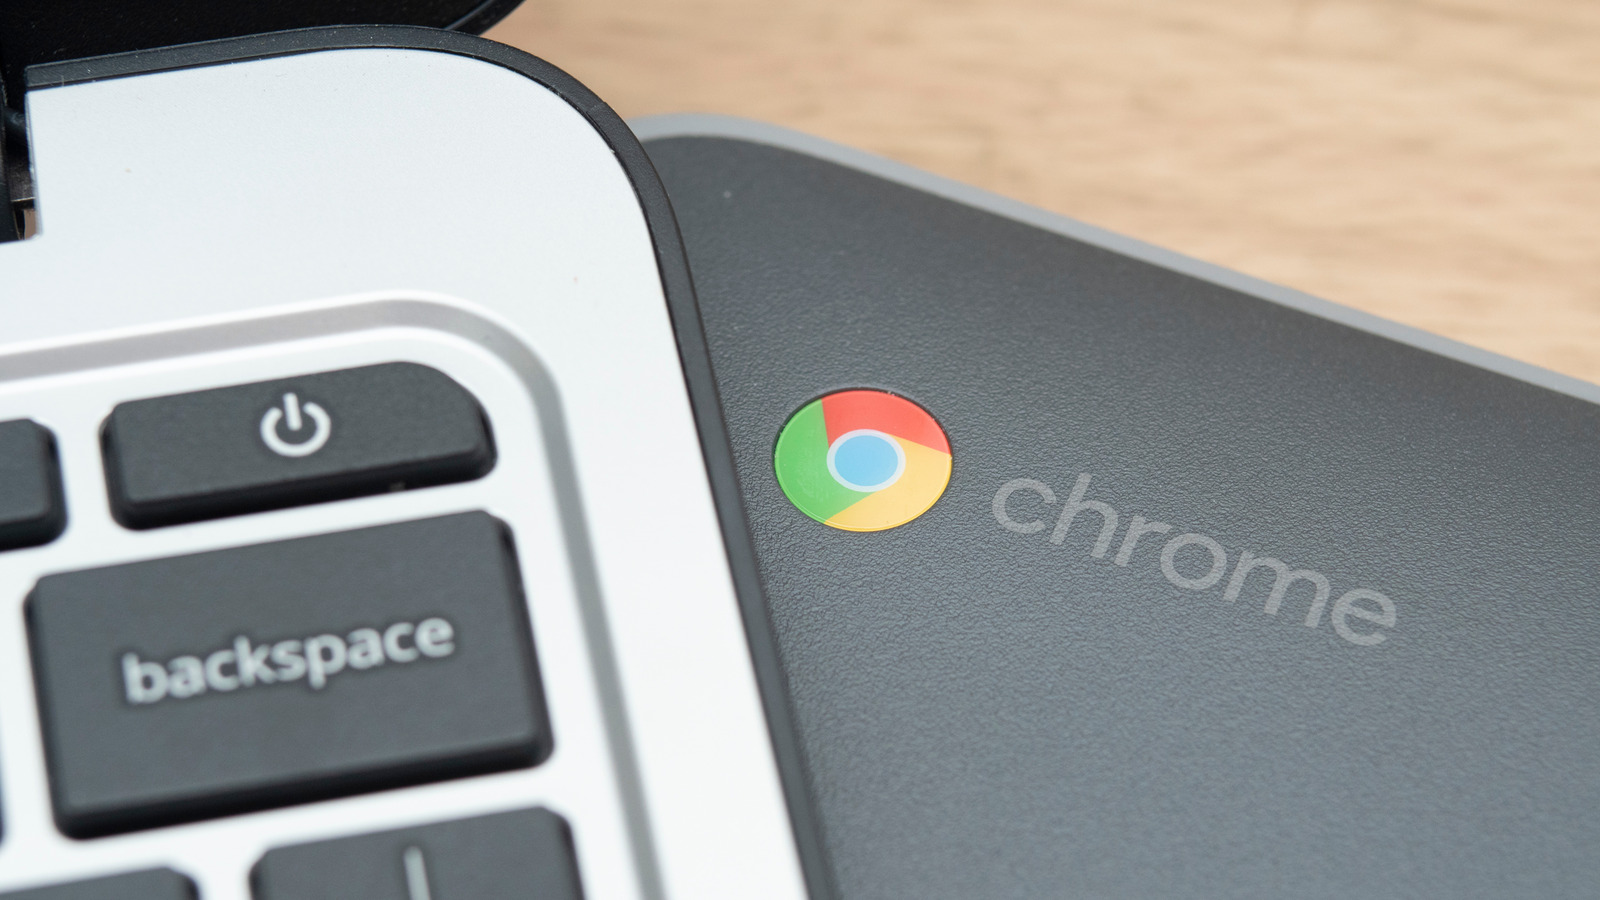 How to unblock websites on school Chromebook - Android Authority